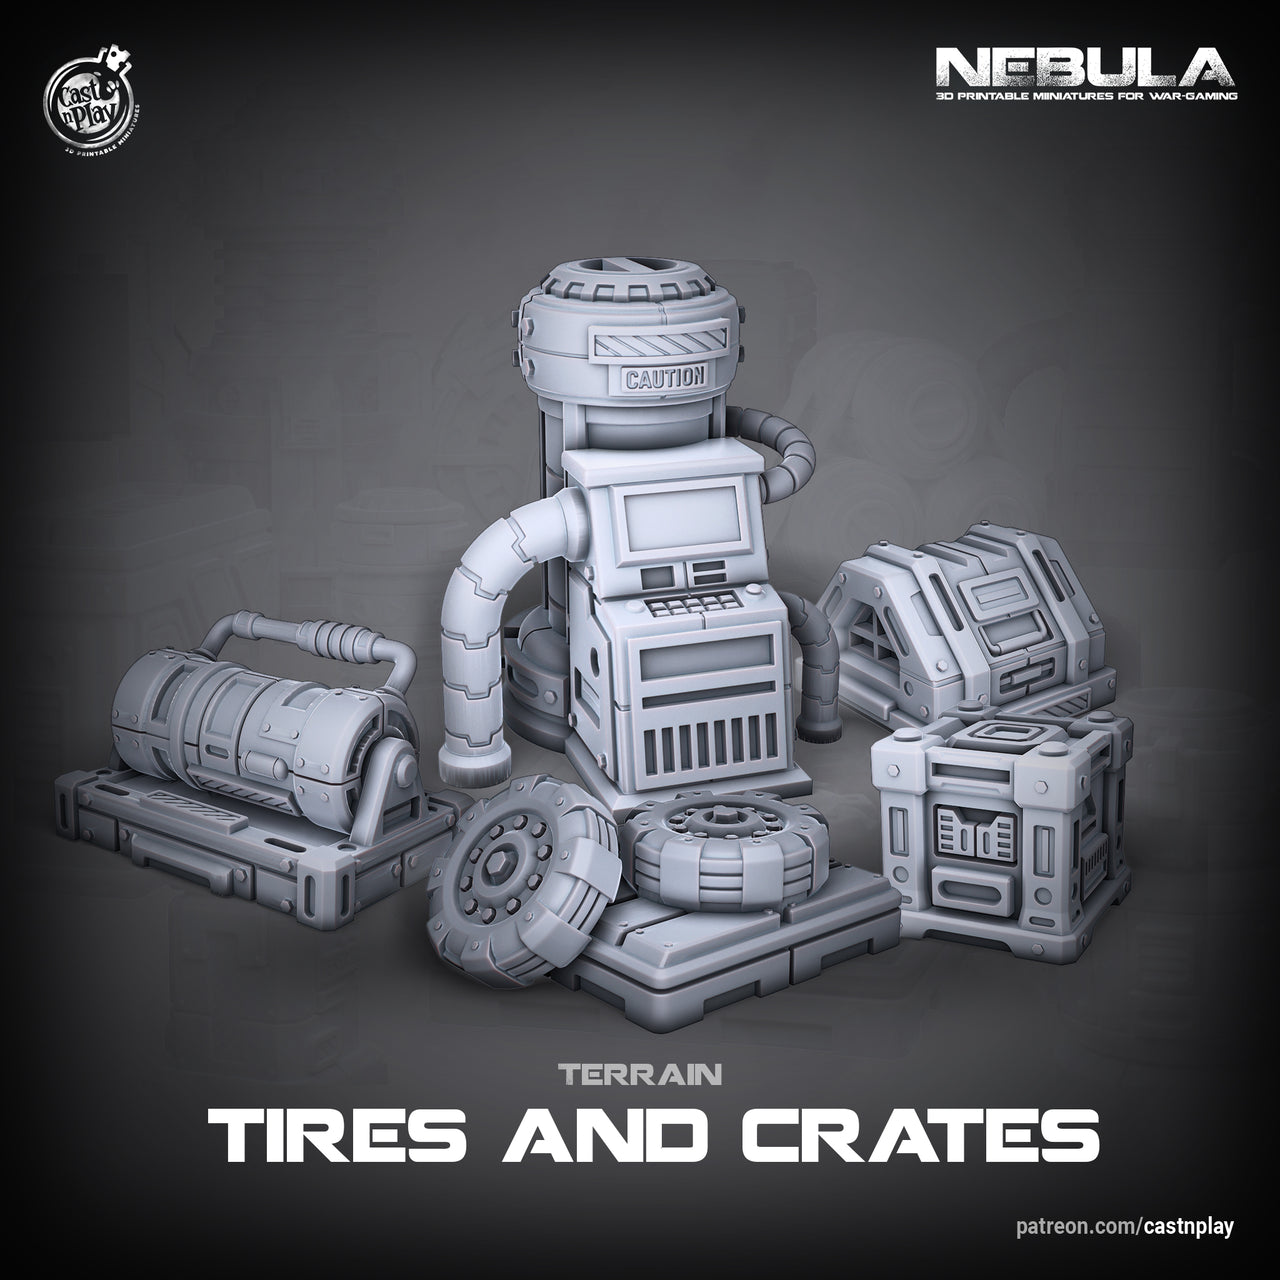 Tires and Crates